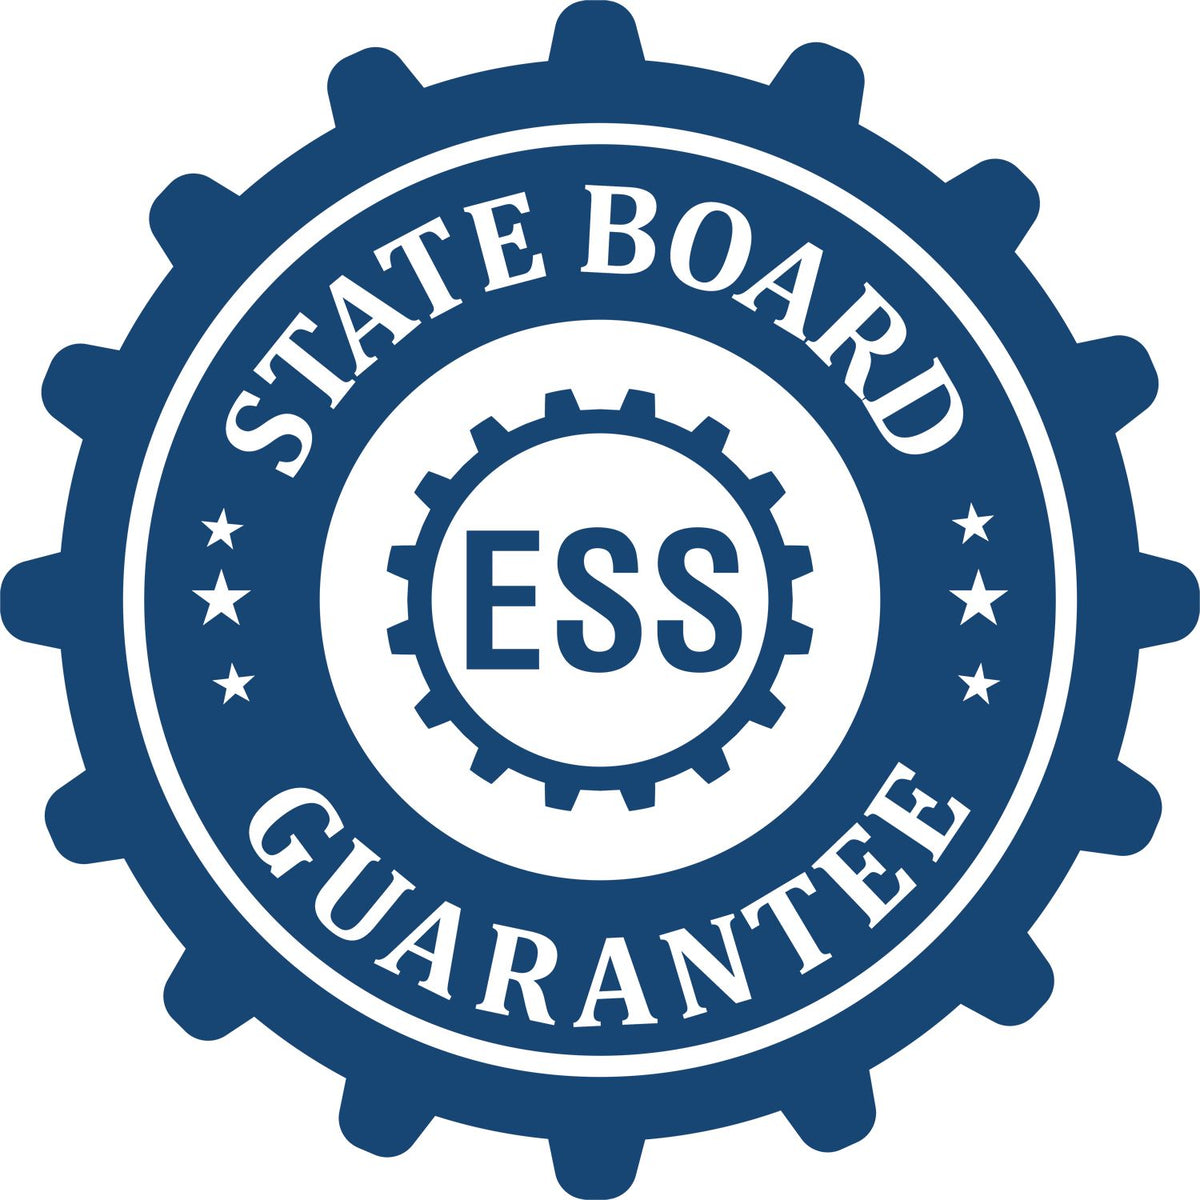 An emblem in a gear shape illustrating a state board guarantee for the Heavy-Duty Iowa Rectangular Notary Stamp product.